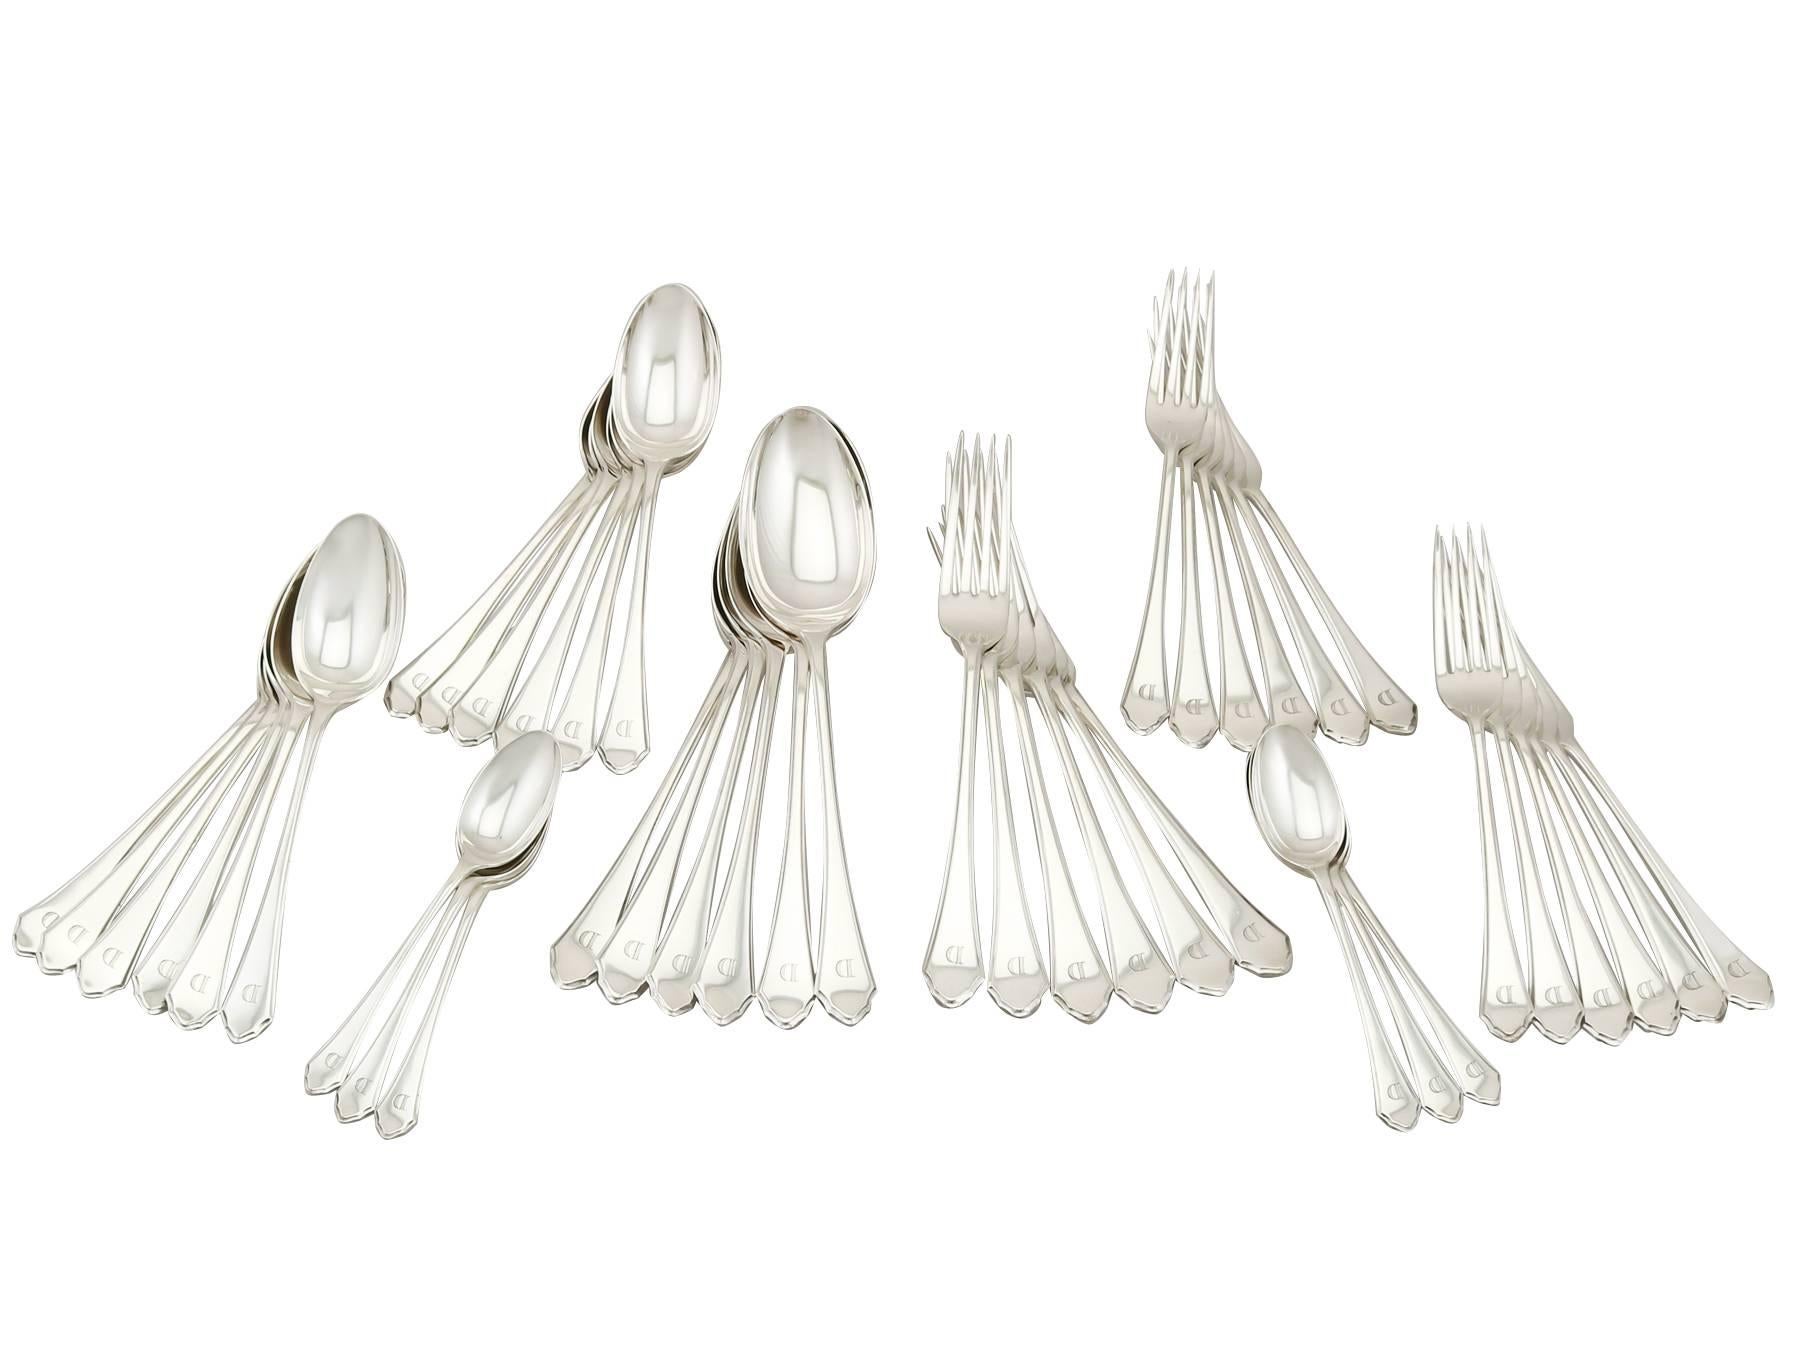 An exceptional, fine and impressive, comprehensive antique George V English sterling silver straight Pembury pattern flatware service made in the Art Deco style; an addition to our canteen of cutlery collection.

The pieces of this exceptional and